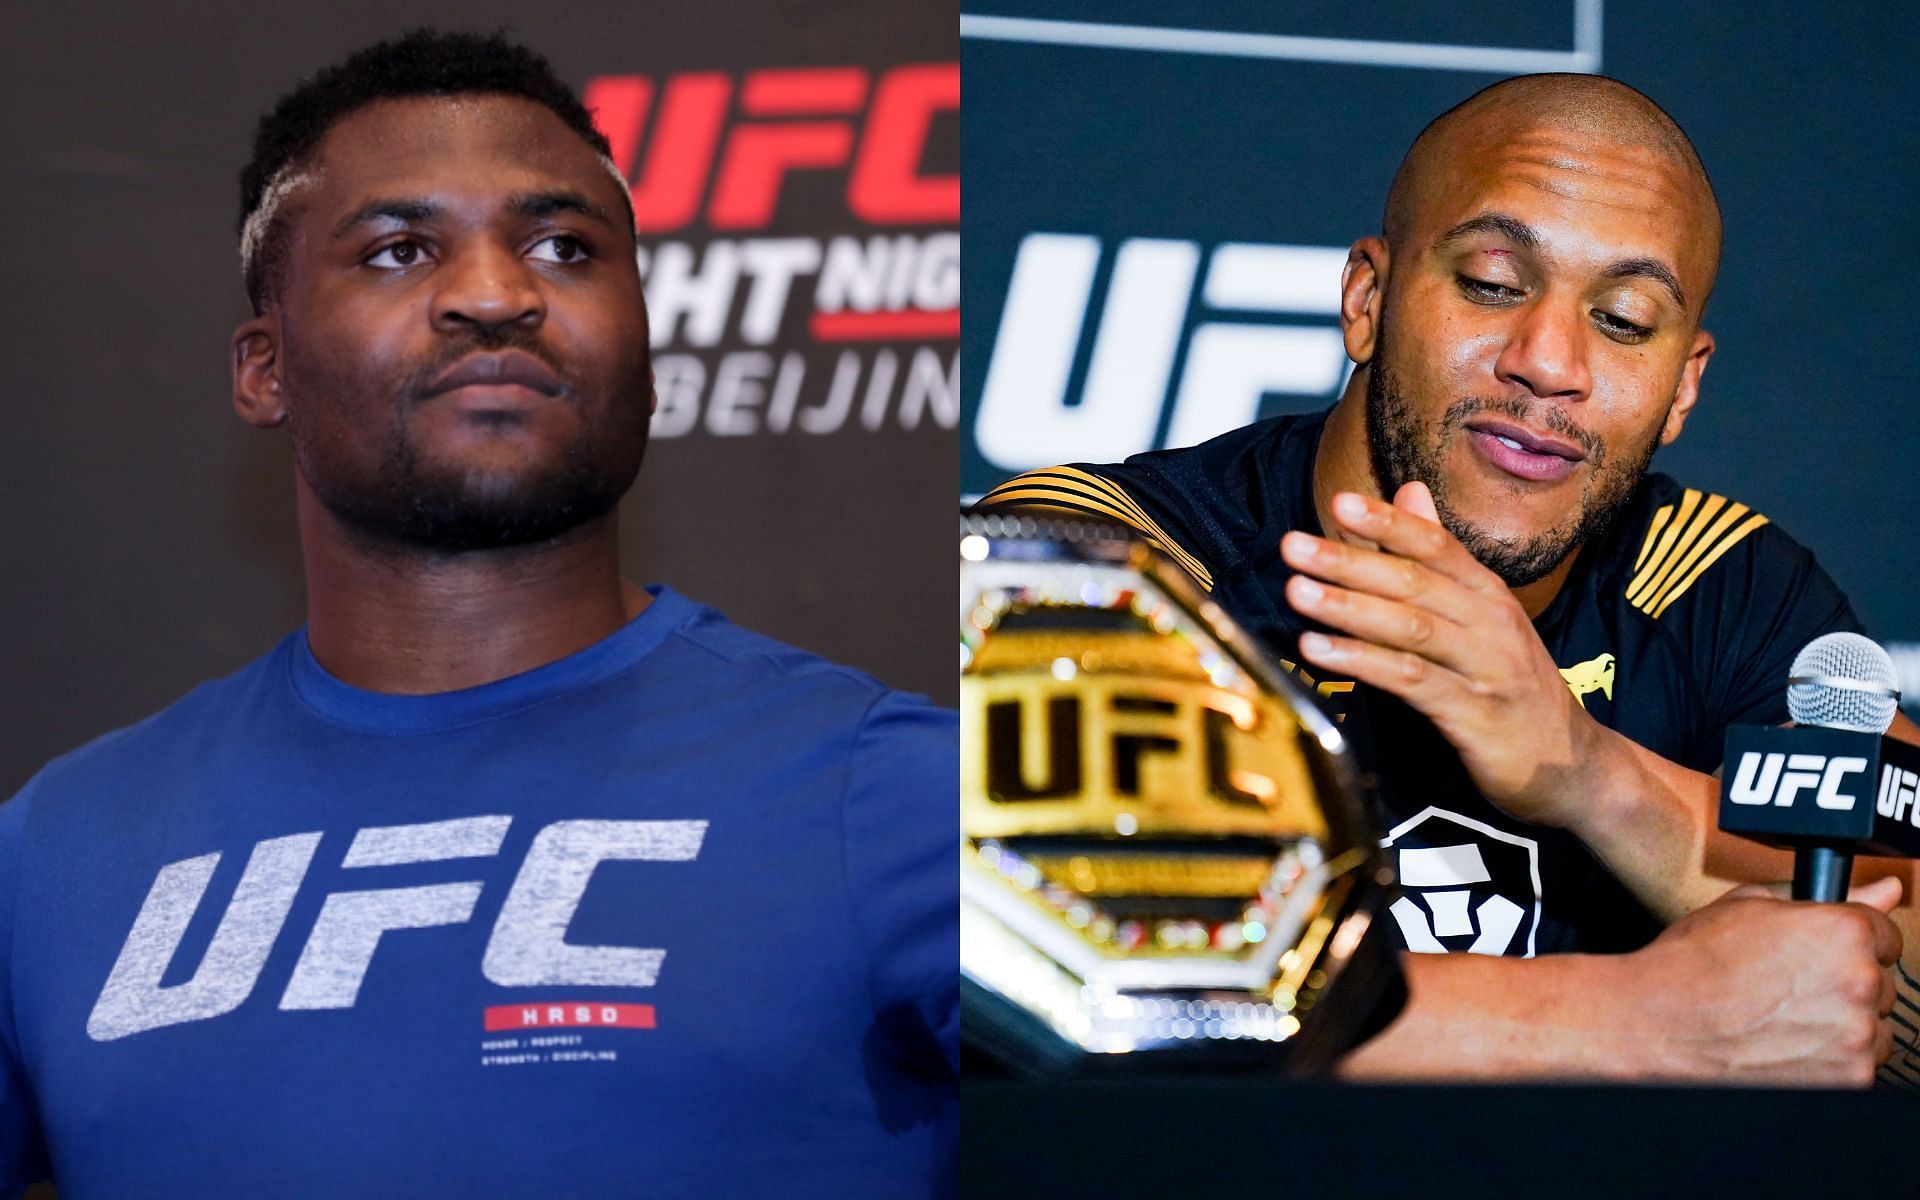 Heavyweight UFC champions and arch rivals Francis Ngannou (left) and Ciryl Gane (right)